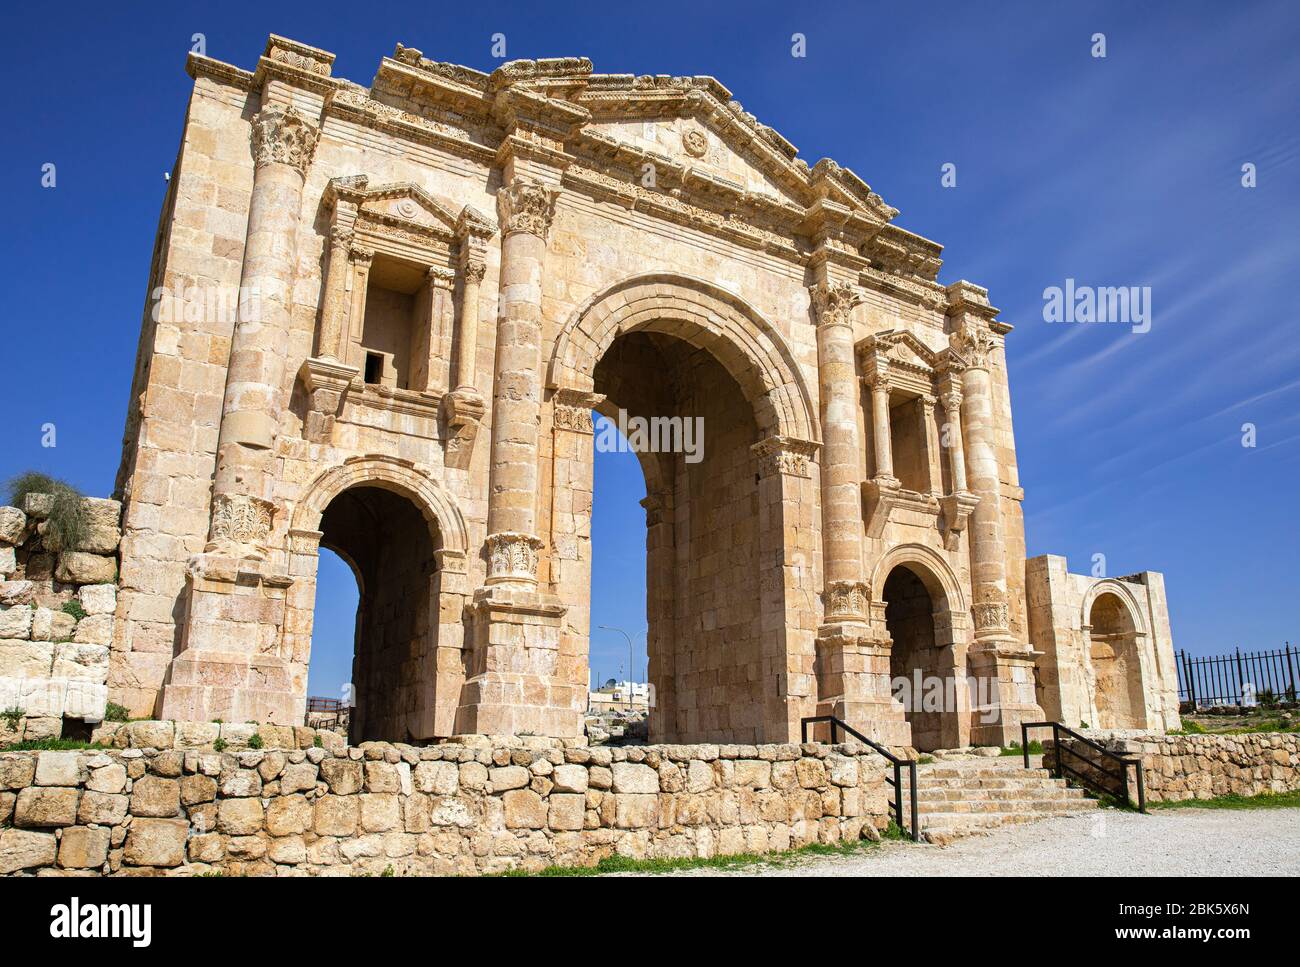 Hadrian's Arch at Jerash Archaeological Site of Ancient Roman Ruins, Jordan Stock Photo